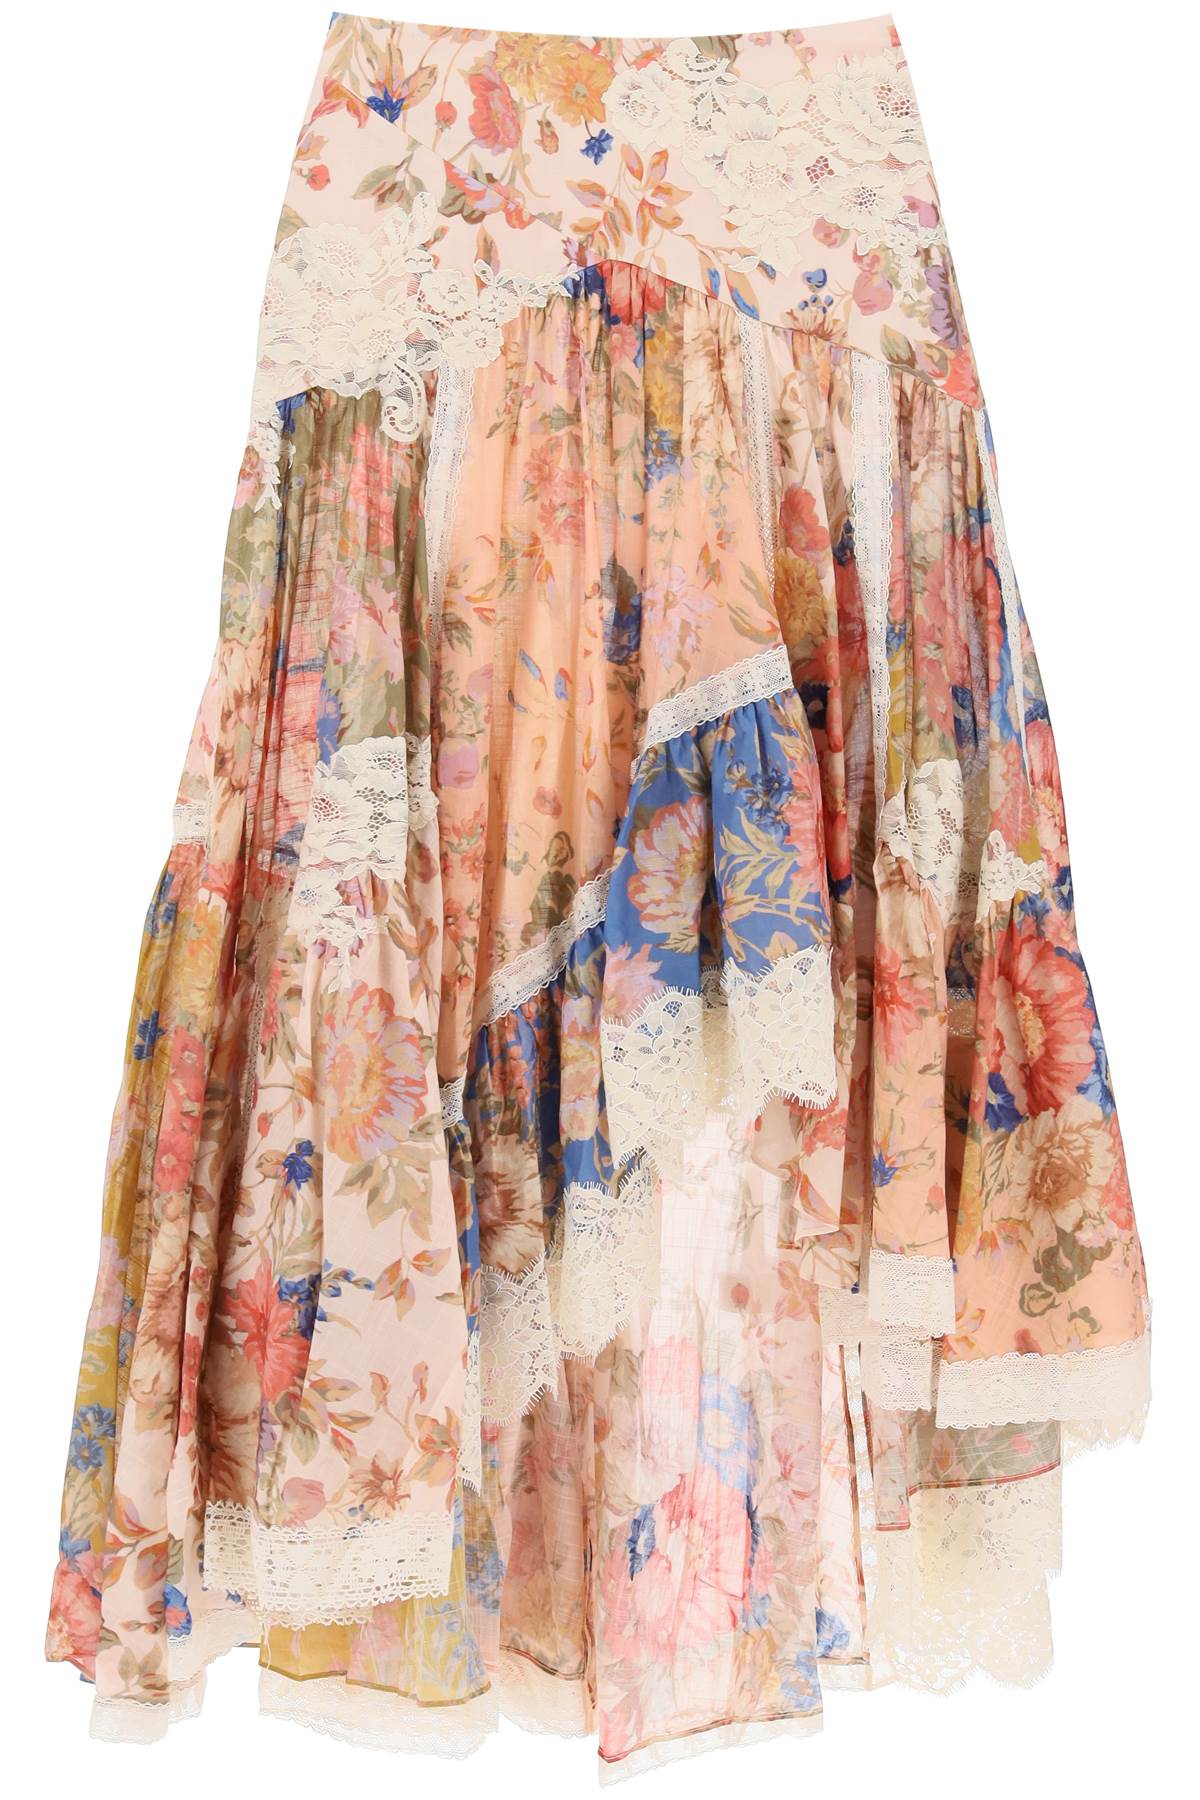 Zimmermann august asymmetric skirt with lace trims-0